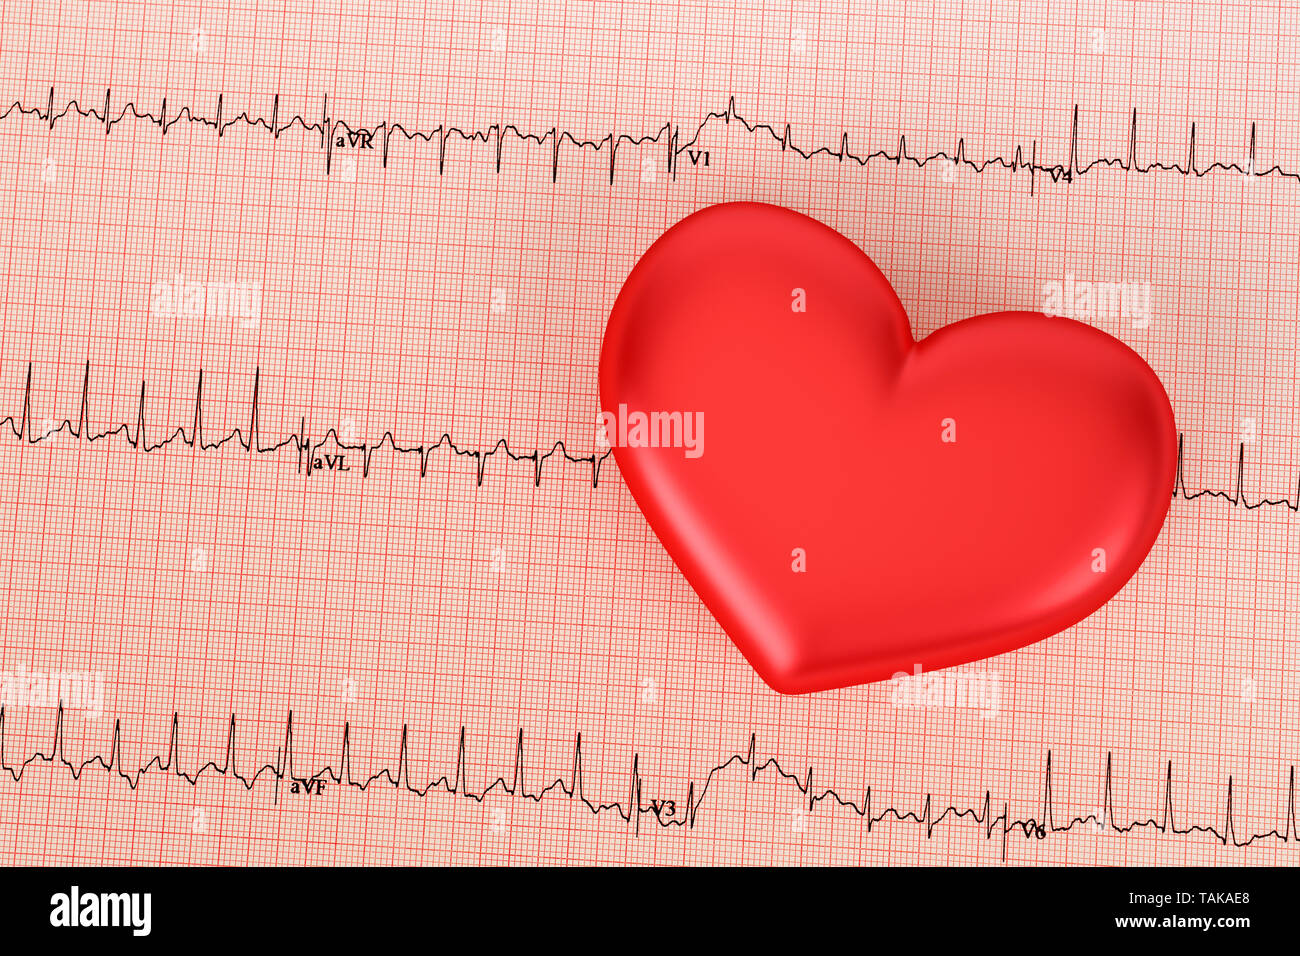 Heart with electrocardiogram test in the background.Health concept.3d rendering Stock Photo